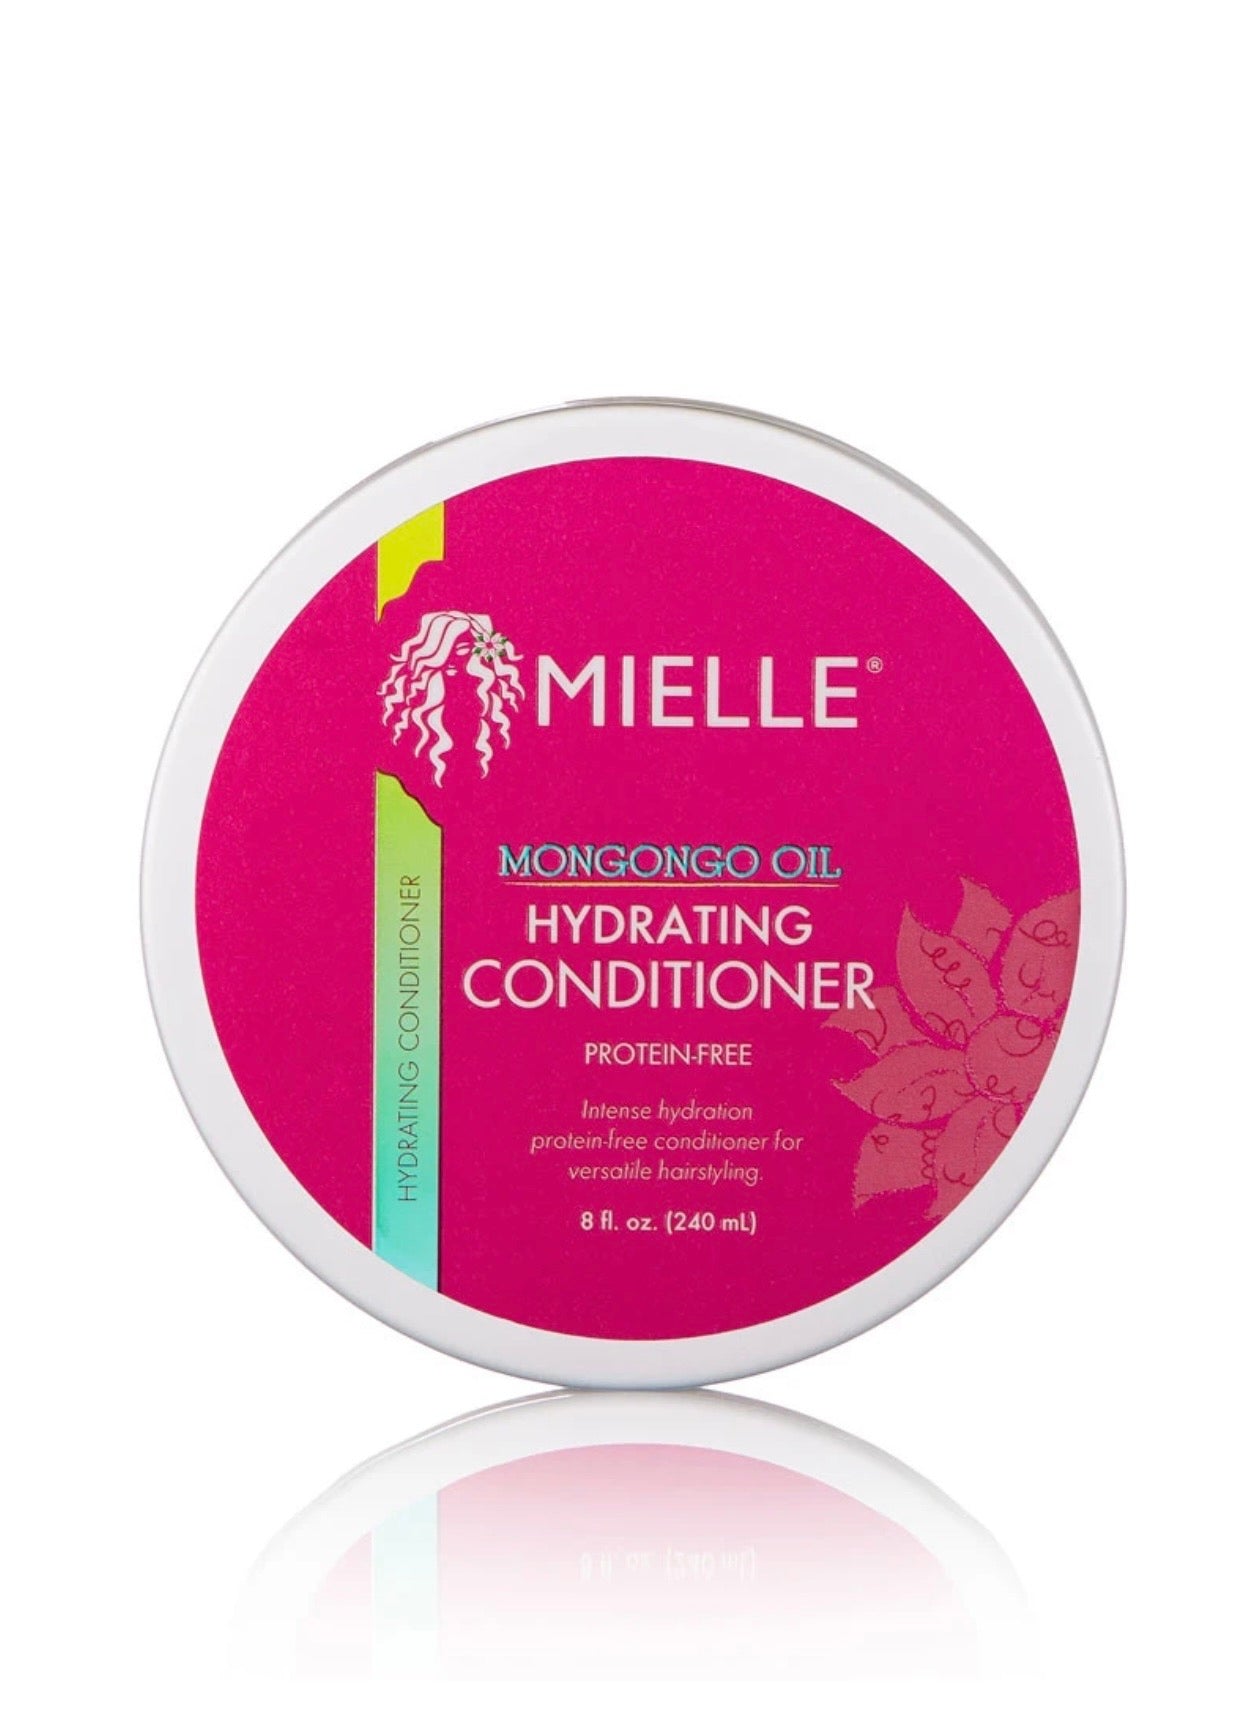 Mongongo Oil Protein-Free Hydrating Conditioner